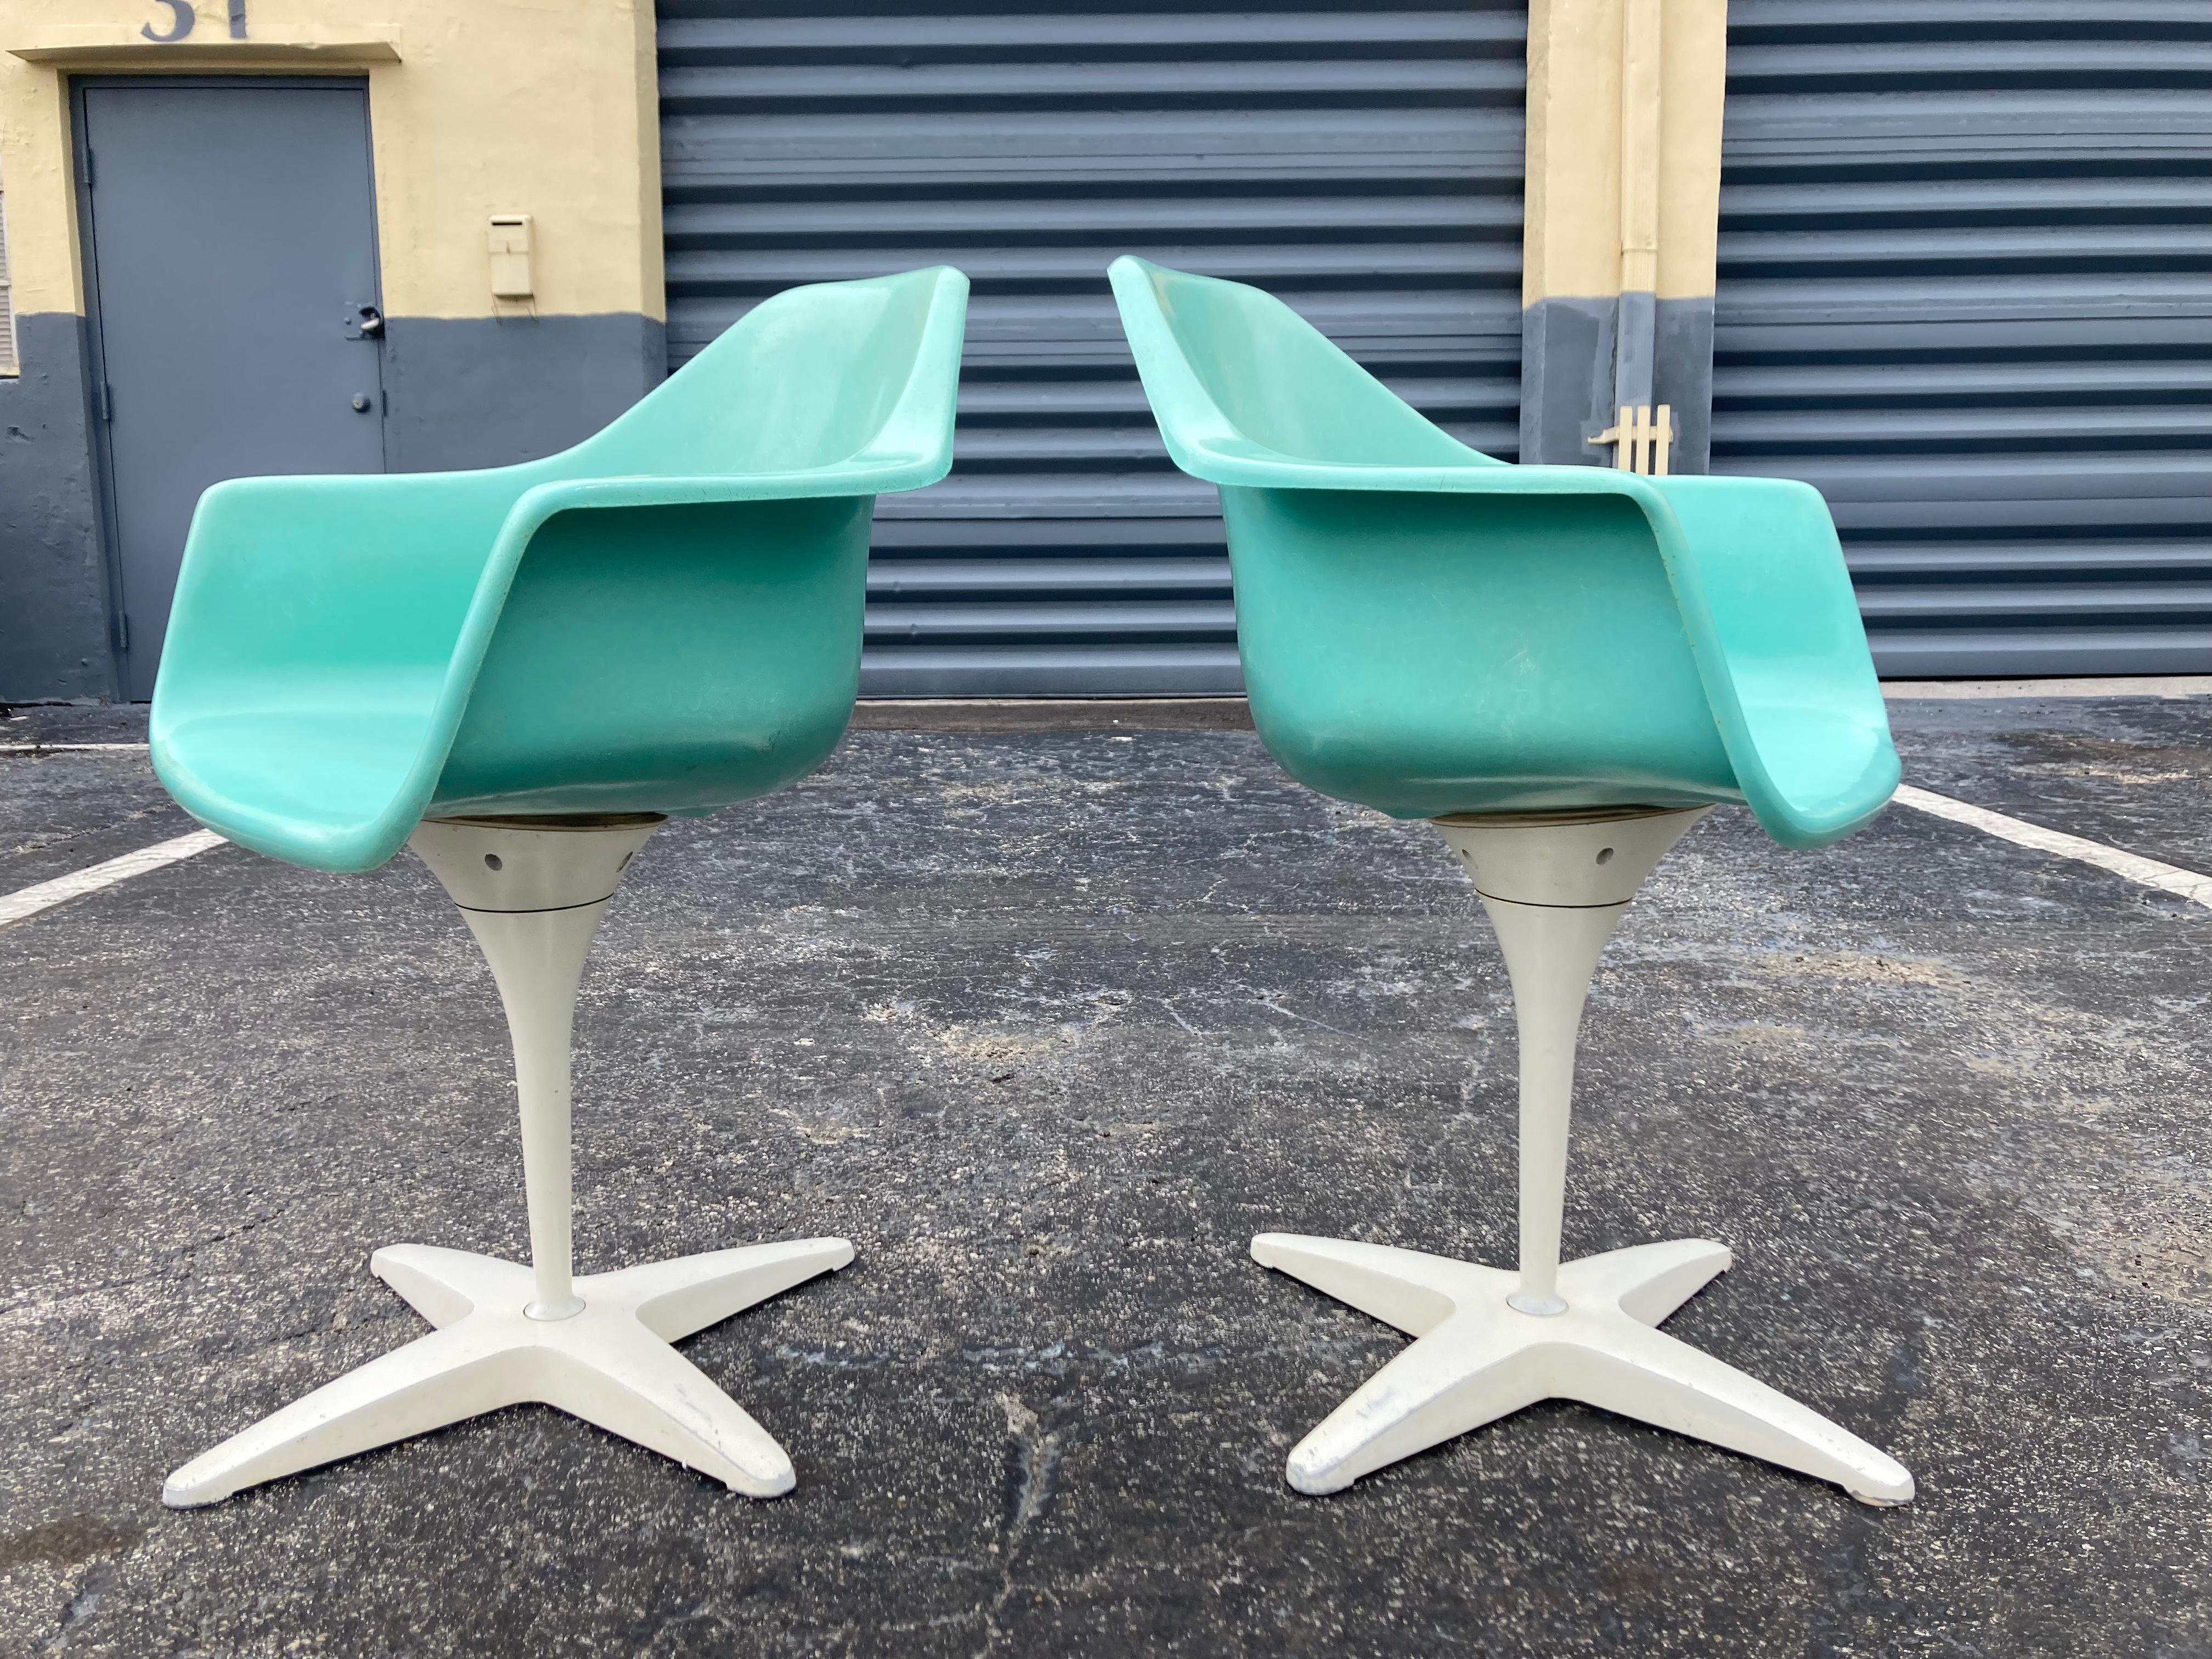 1960s Kitchen Dinette Set, Fiberglass Chairs, Turquoise, Round Table, USA For Sale 3